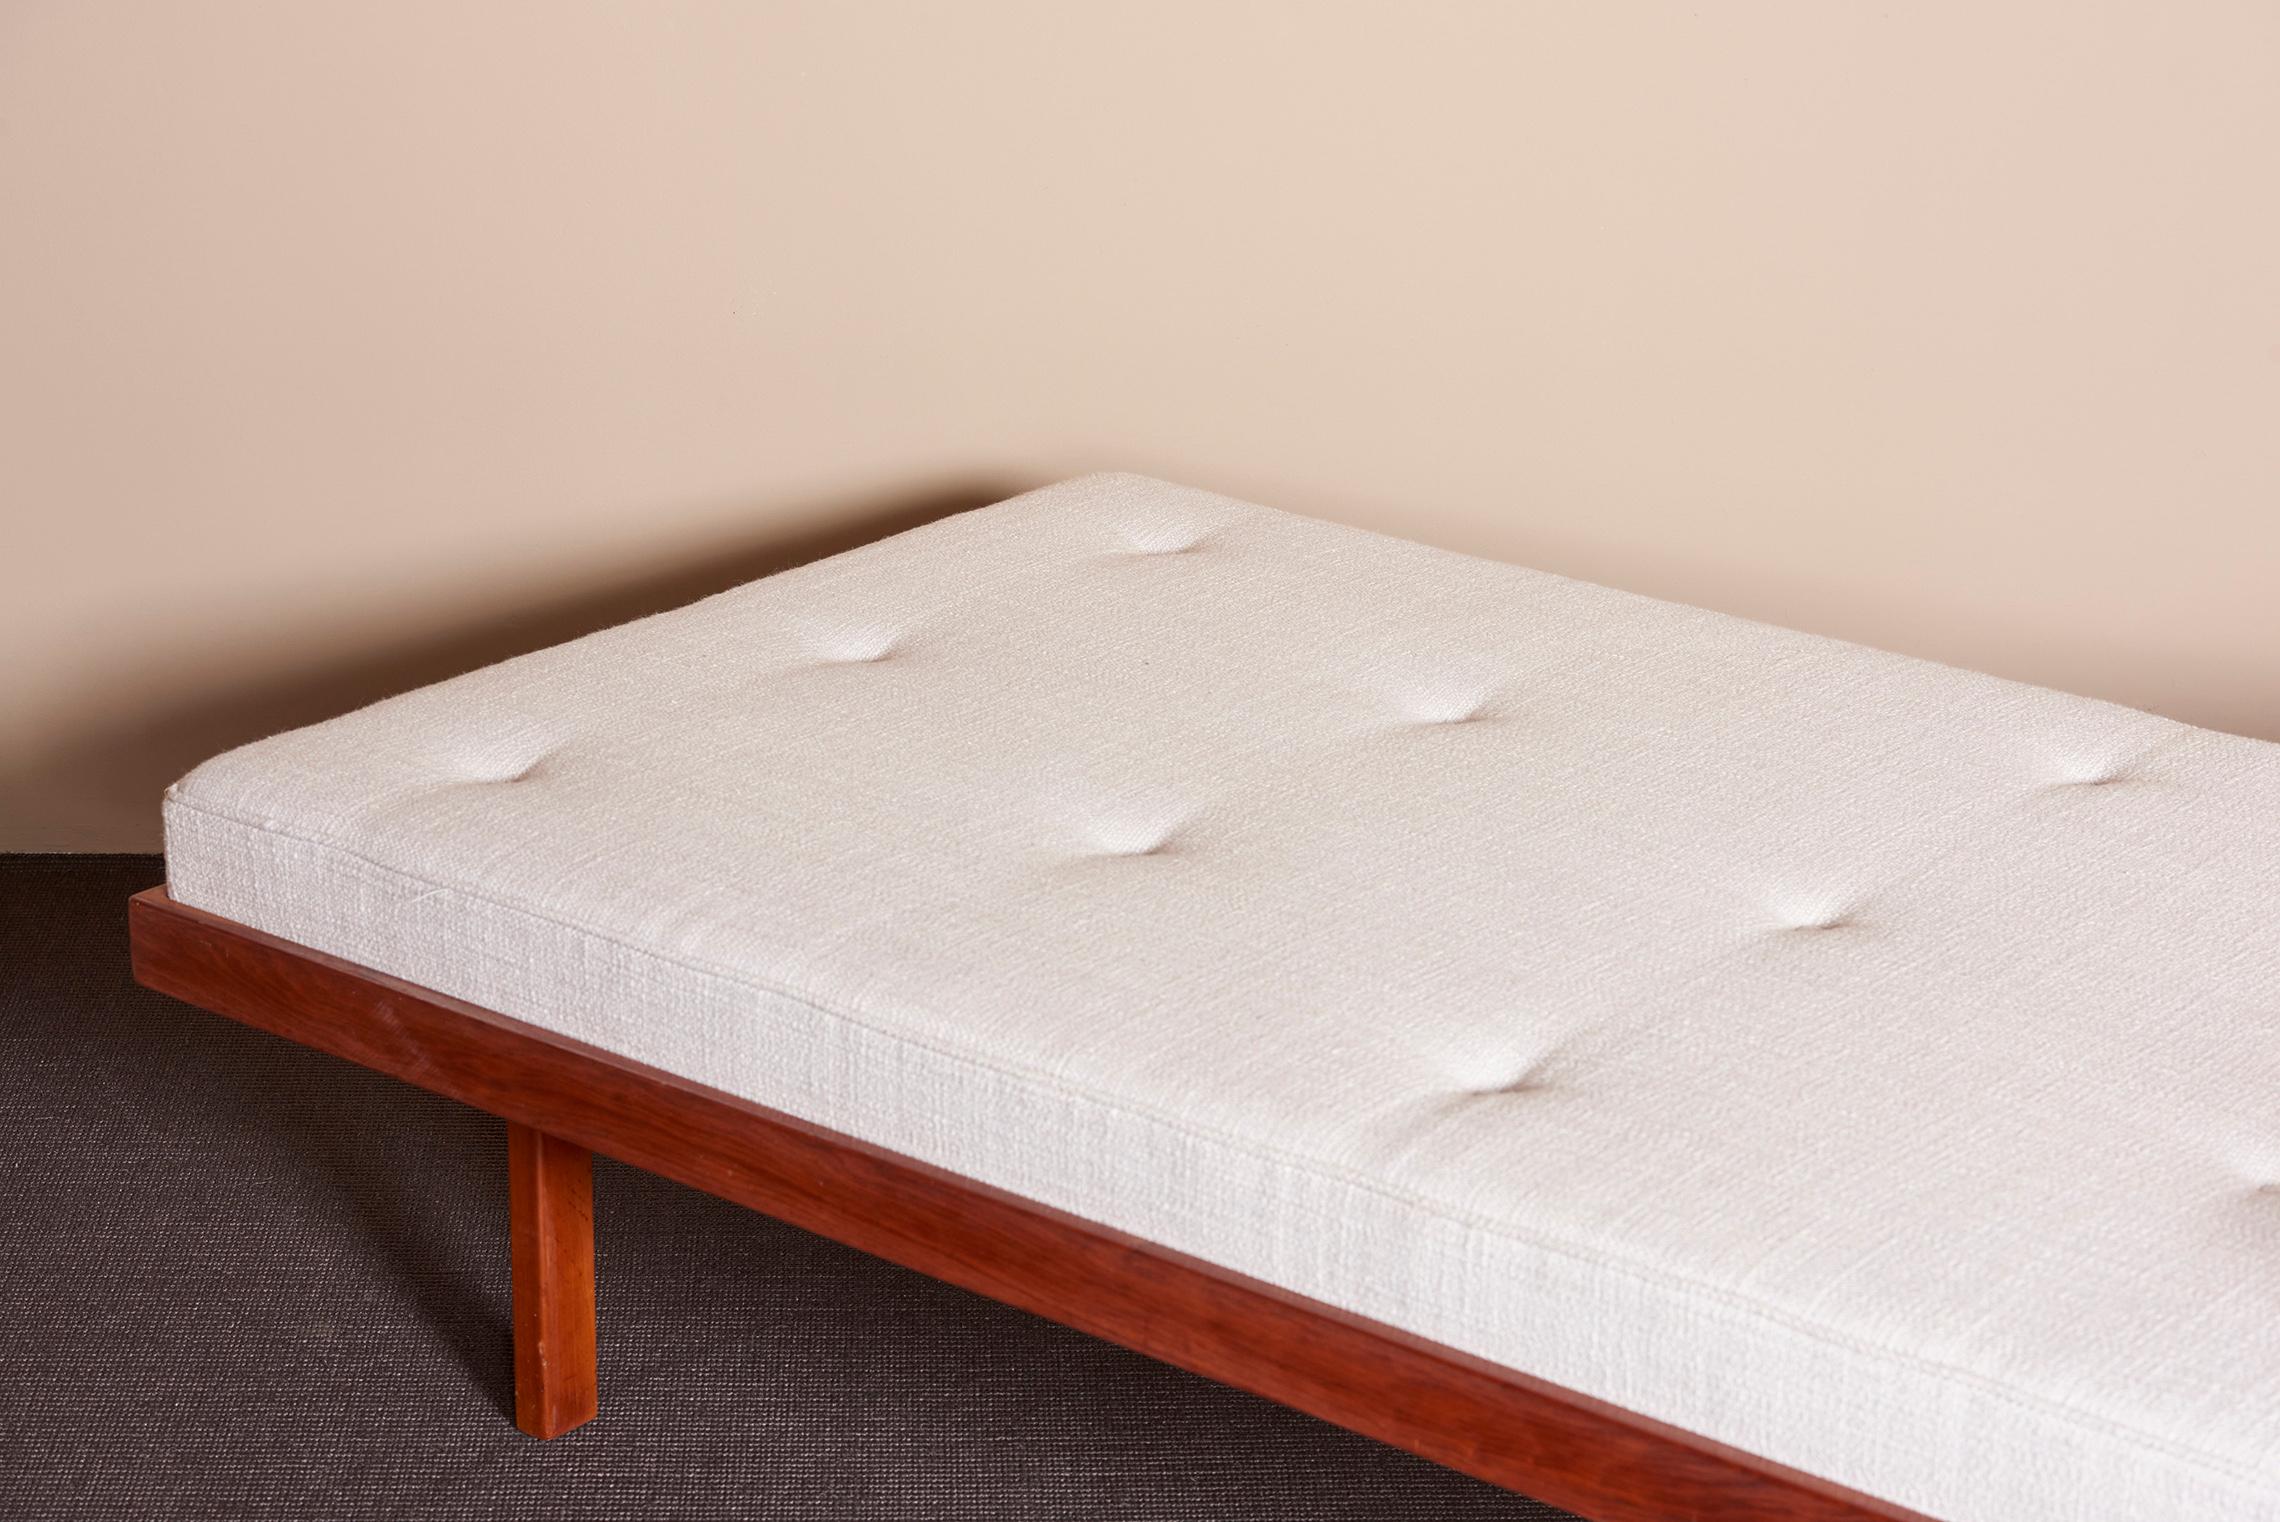 1 of 2 American Studio Walnut Frame Daybeds in Mark Alexander Fabric, US 1960s For Sale 8